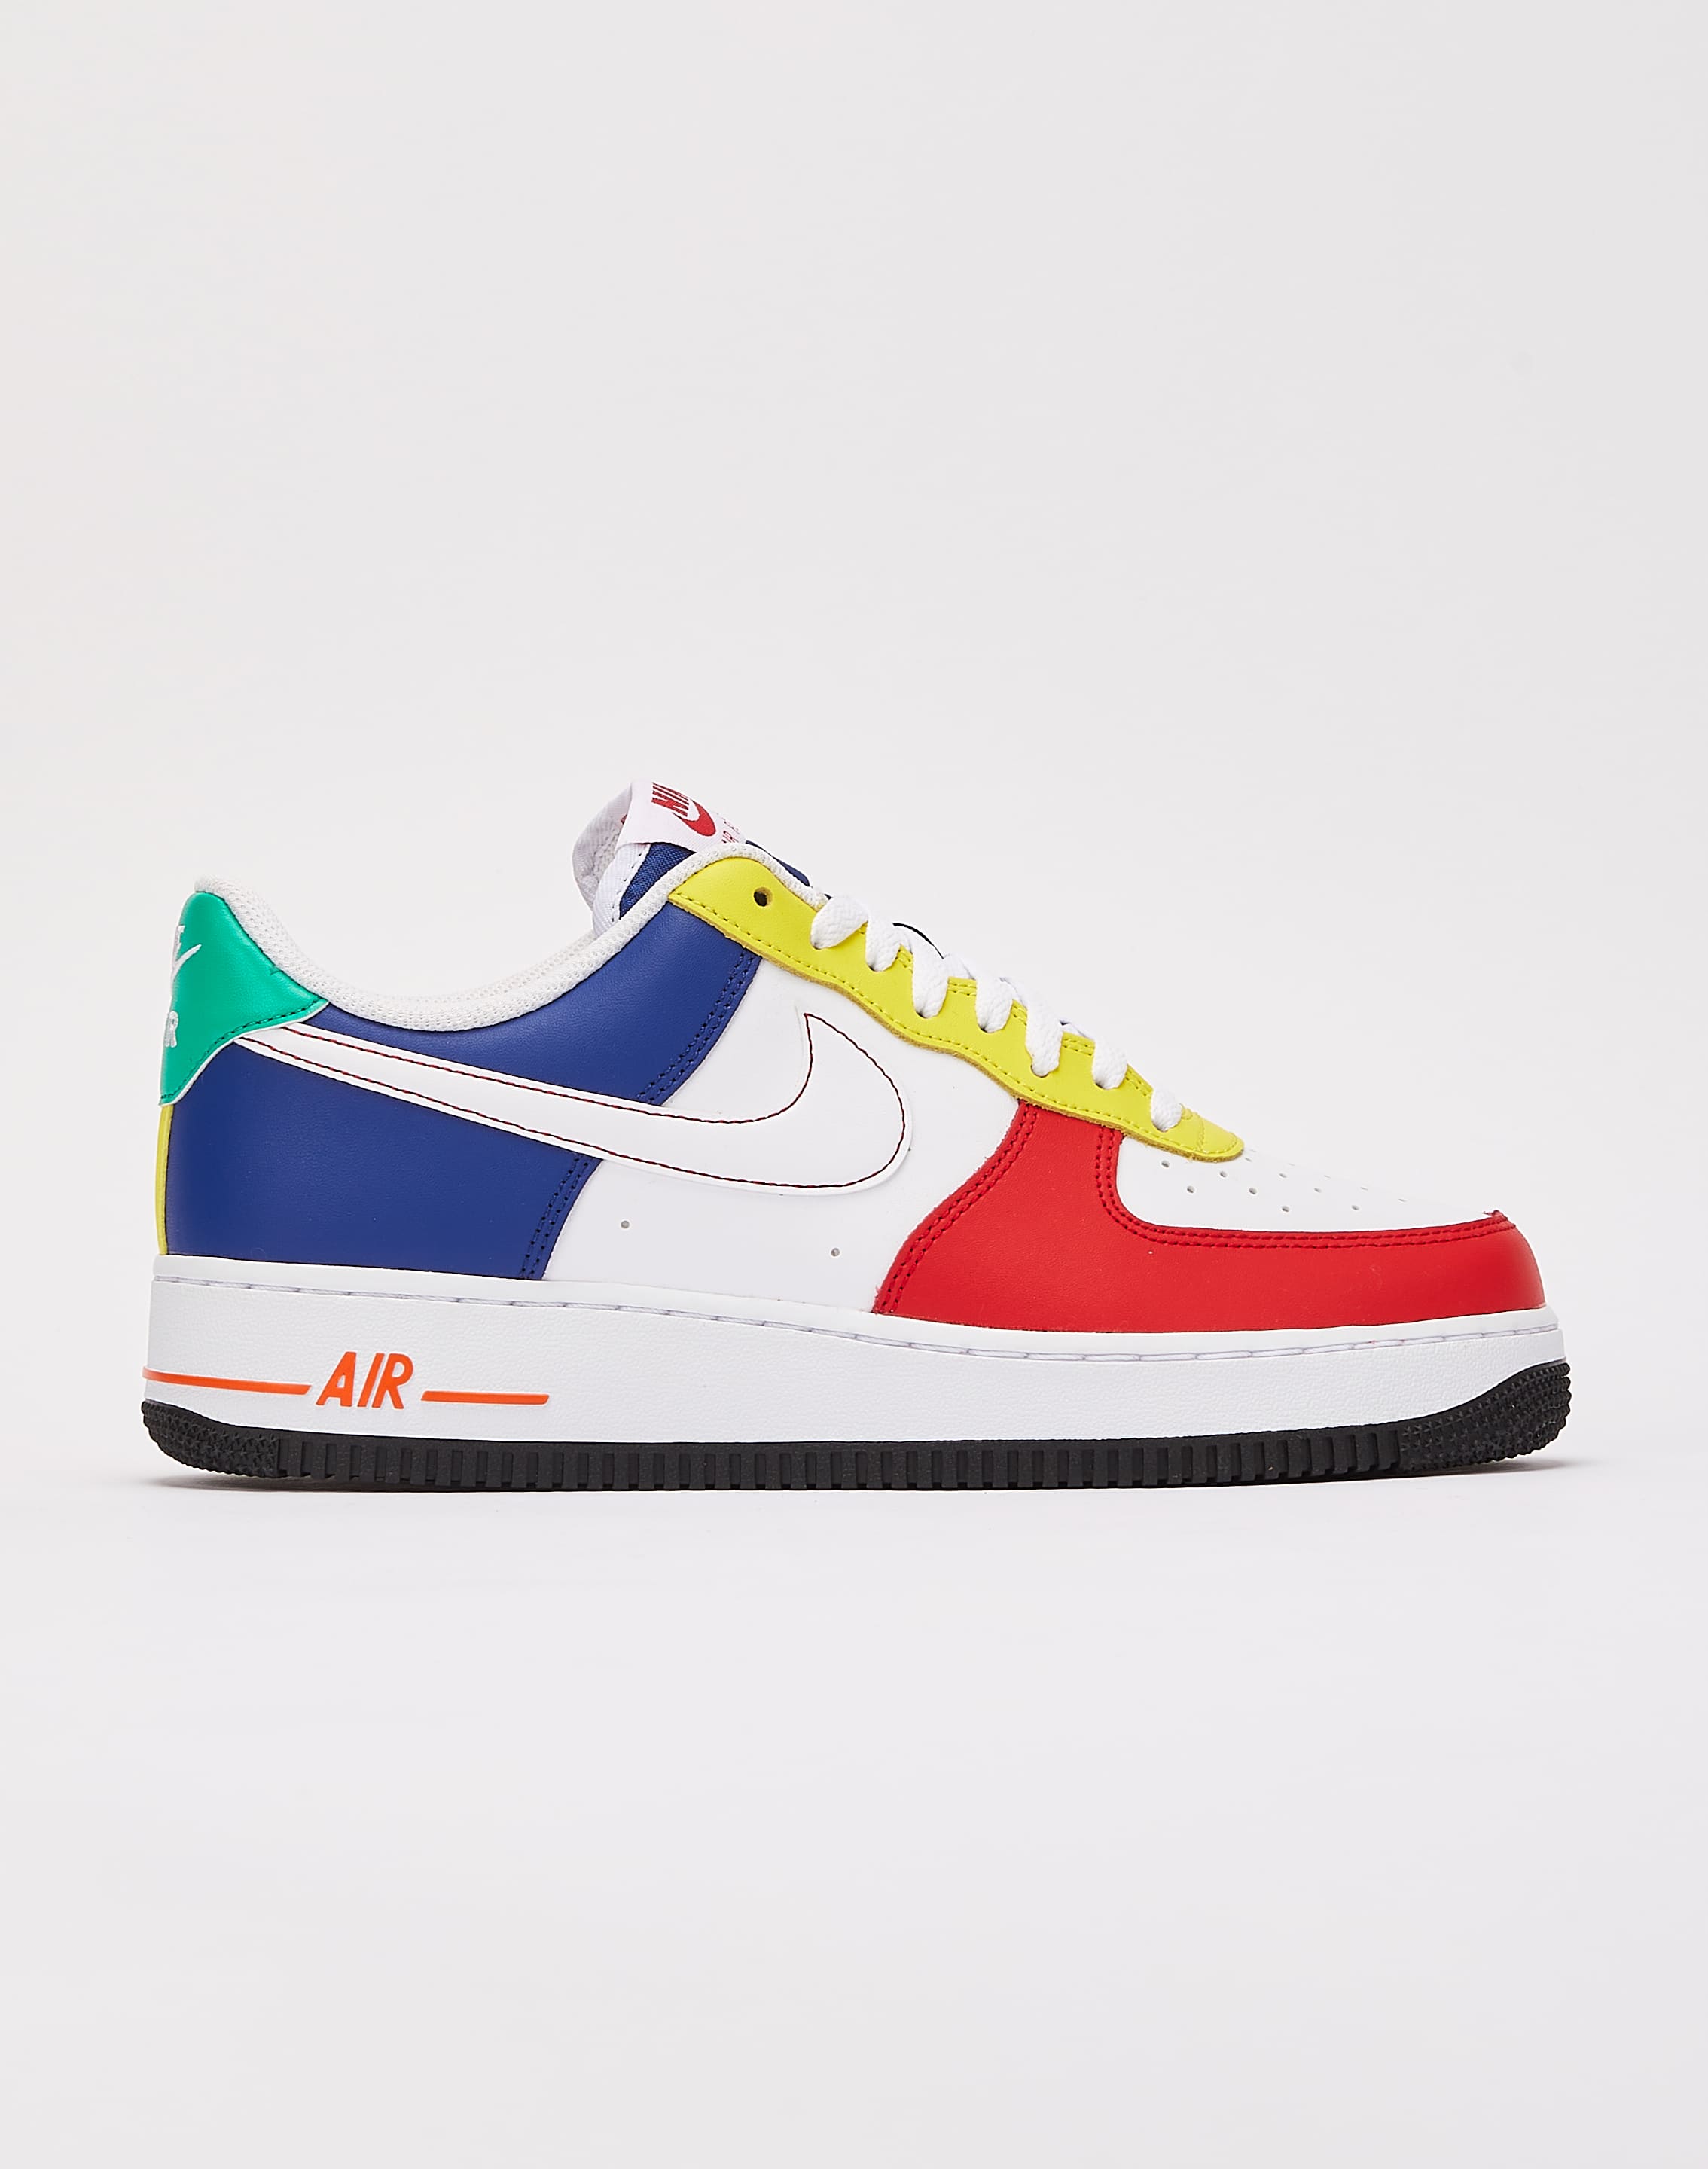 Nike Men's Air Force 1 '07 LV8 3 Removable Swoosh Shoes